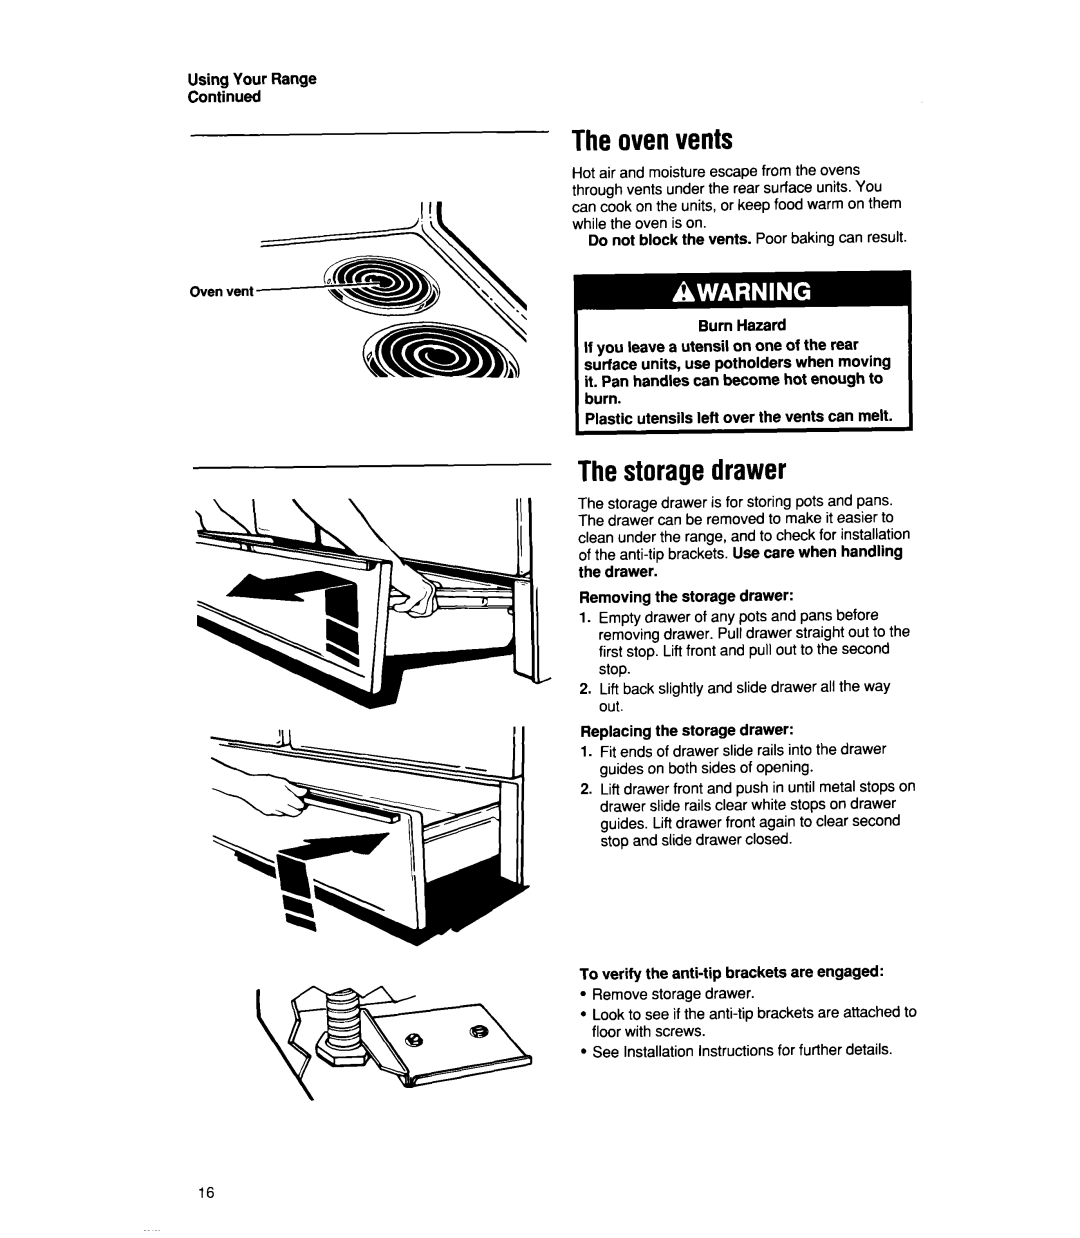 Whirlpool RF4700XW manual The oven vents, The storage drawer, Do not block the vents. Poor baking can result, Burn Hazard 